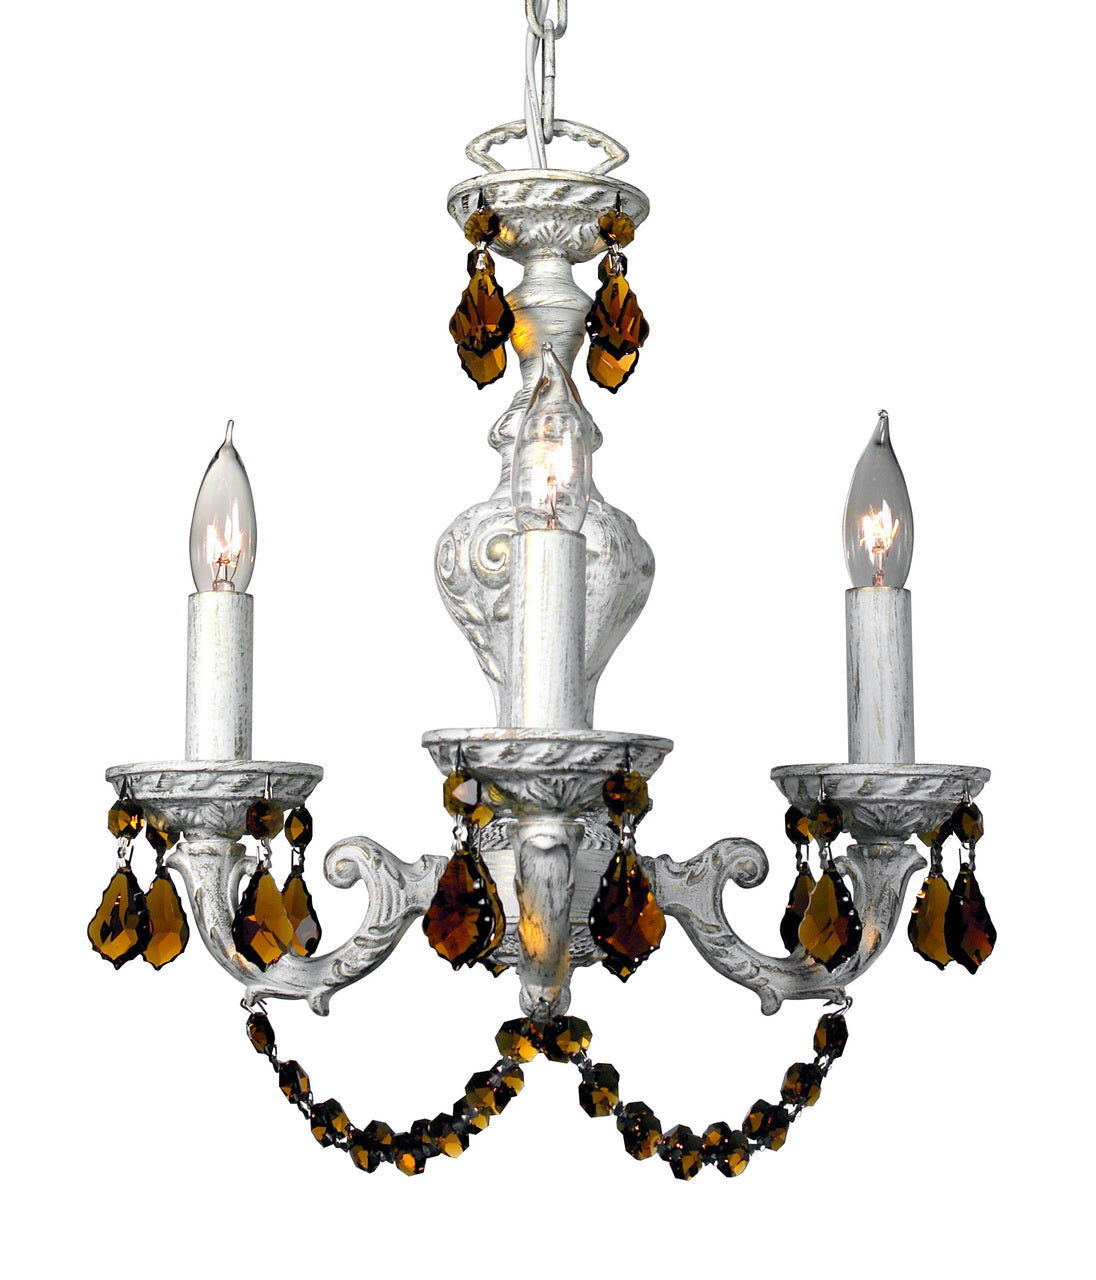 Classic Lighting 8335 AW AM Gabrielle Crystal Mini Chandelier in Antique White